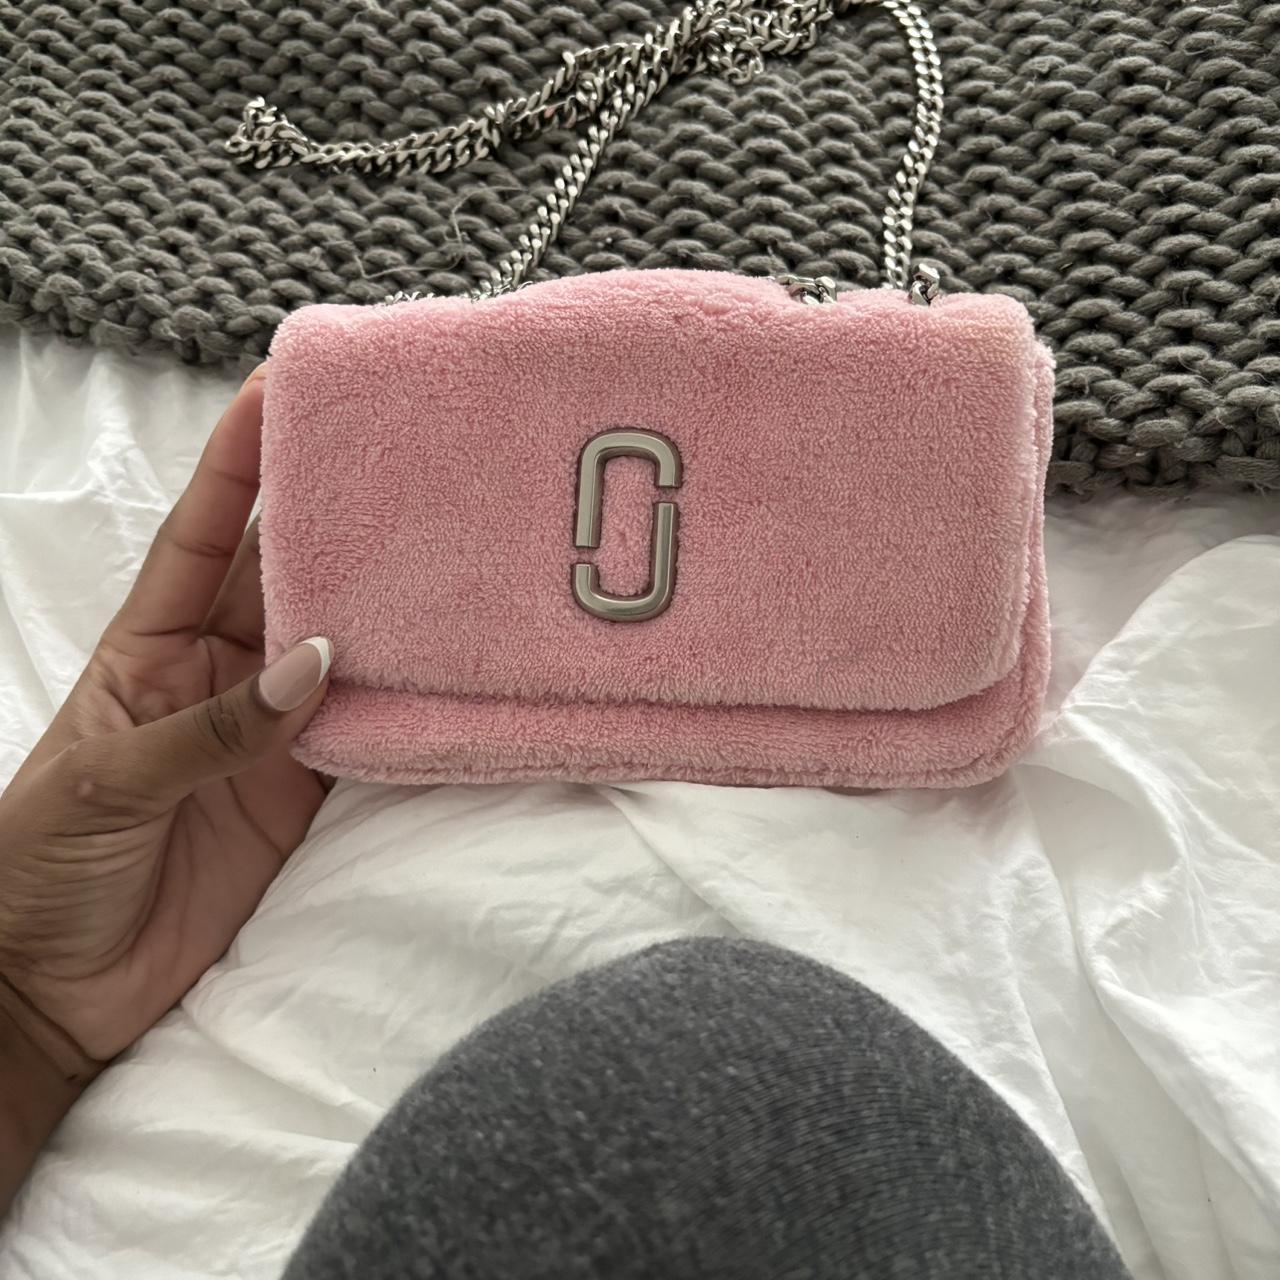 Marc Jacobs Diaper Bag used with stain at zipper - Depop